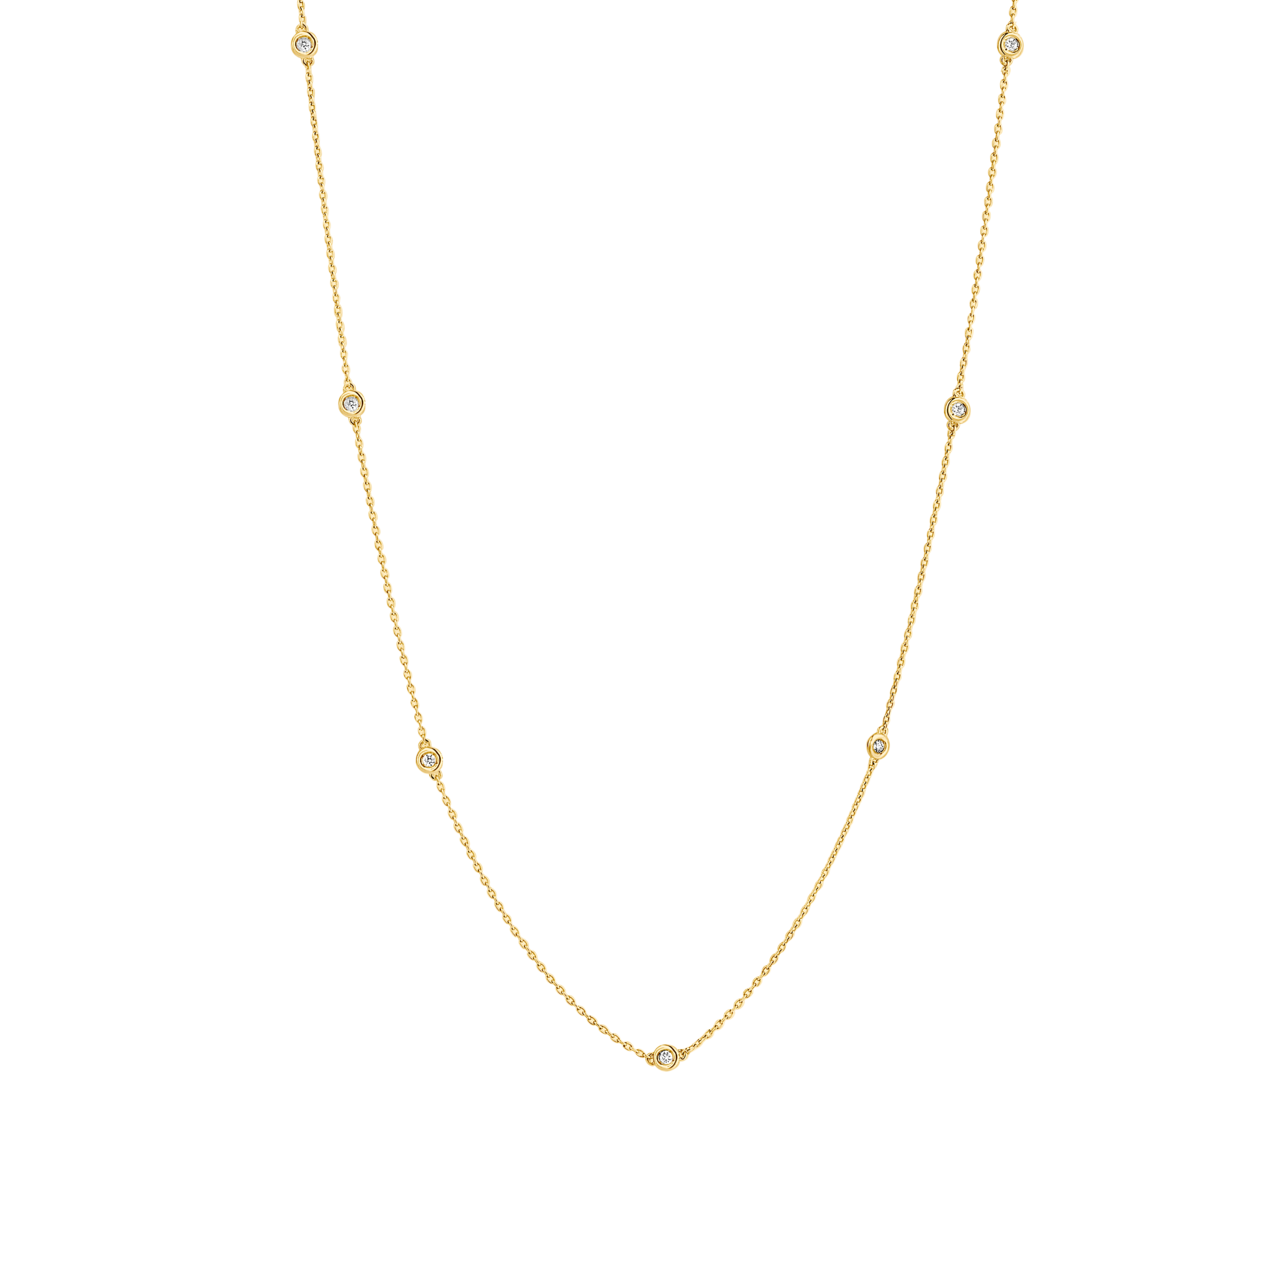 7 bezel-set round brilliants wrap around a 16" (40 cm) chain of recycled 18k Yellow Gold totaling 3.8 grams. Reach out to our Atelier to customize.